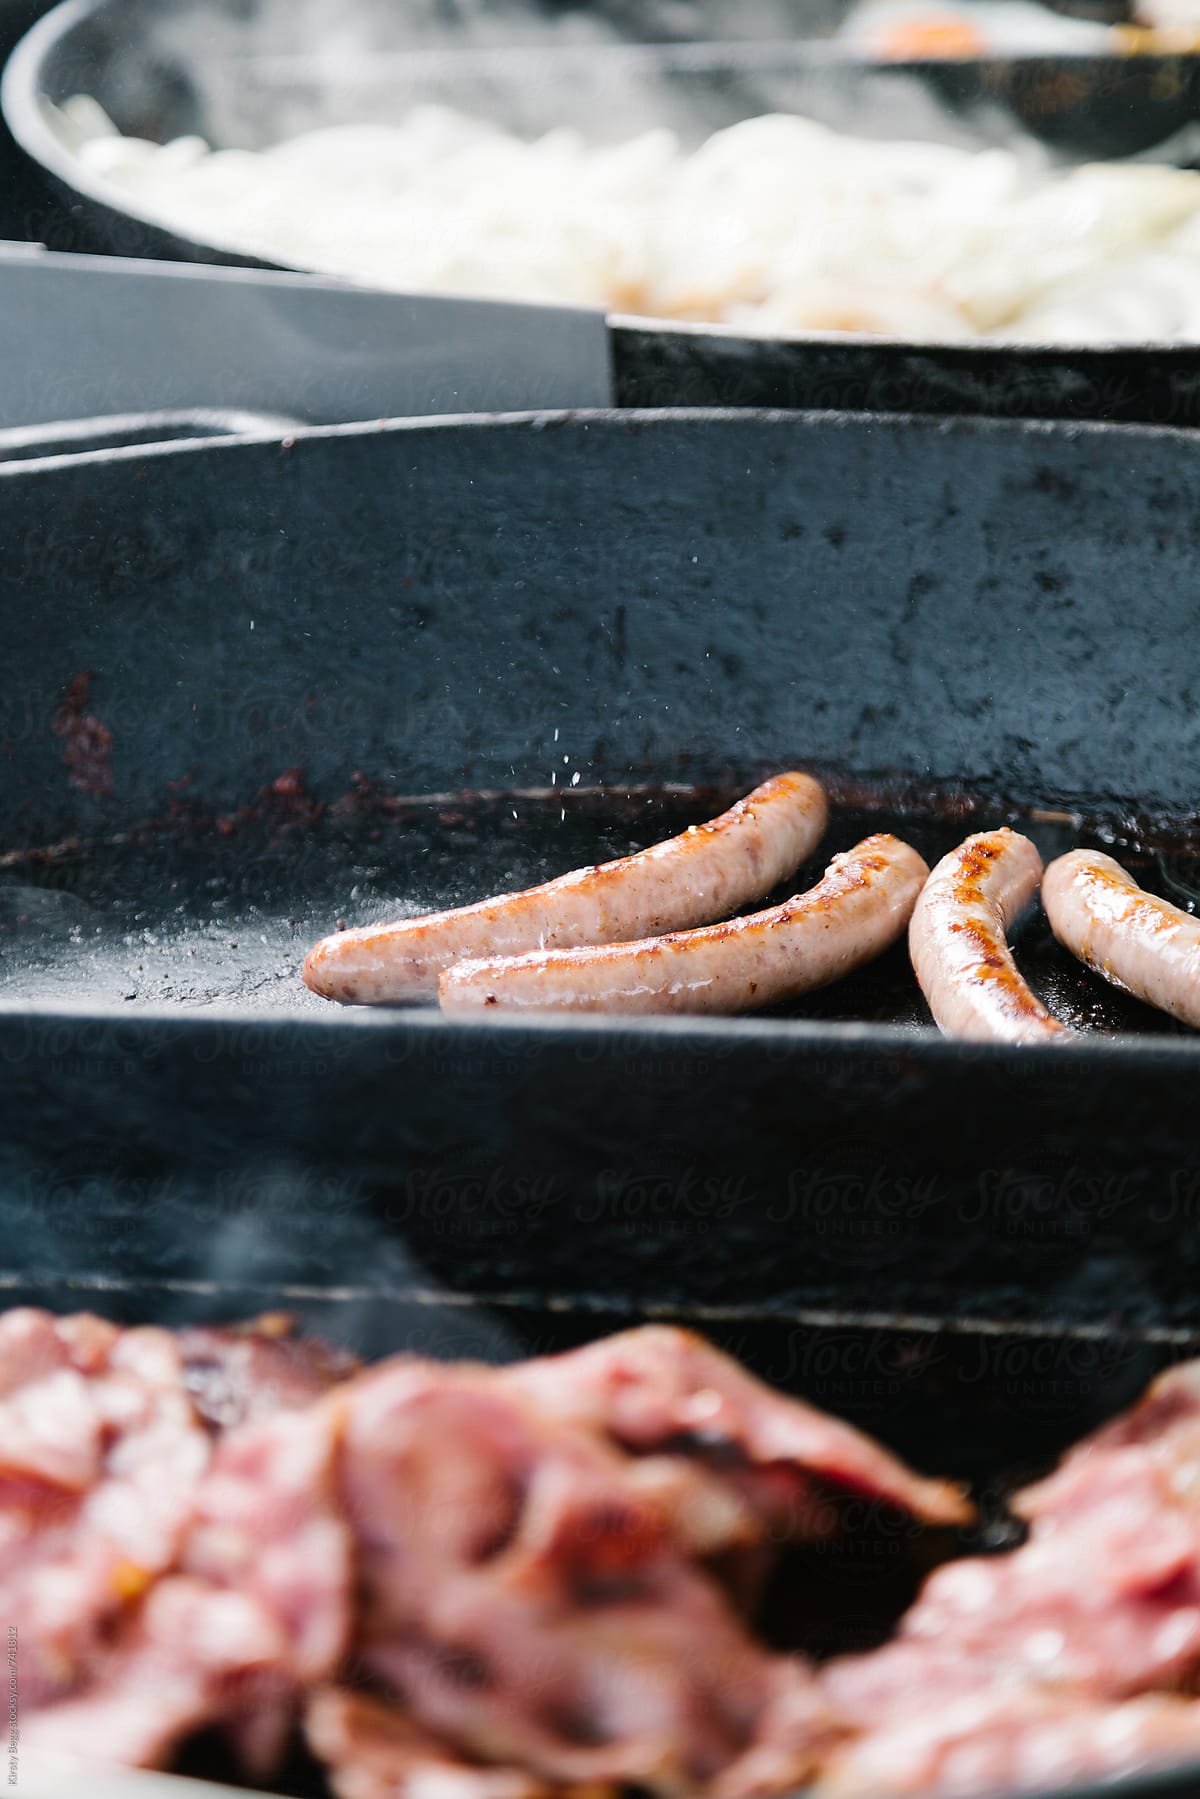 Sizzling sausages in cast iron pan at street market